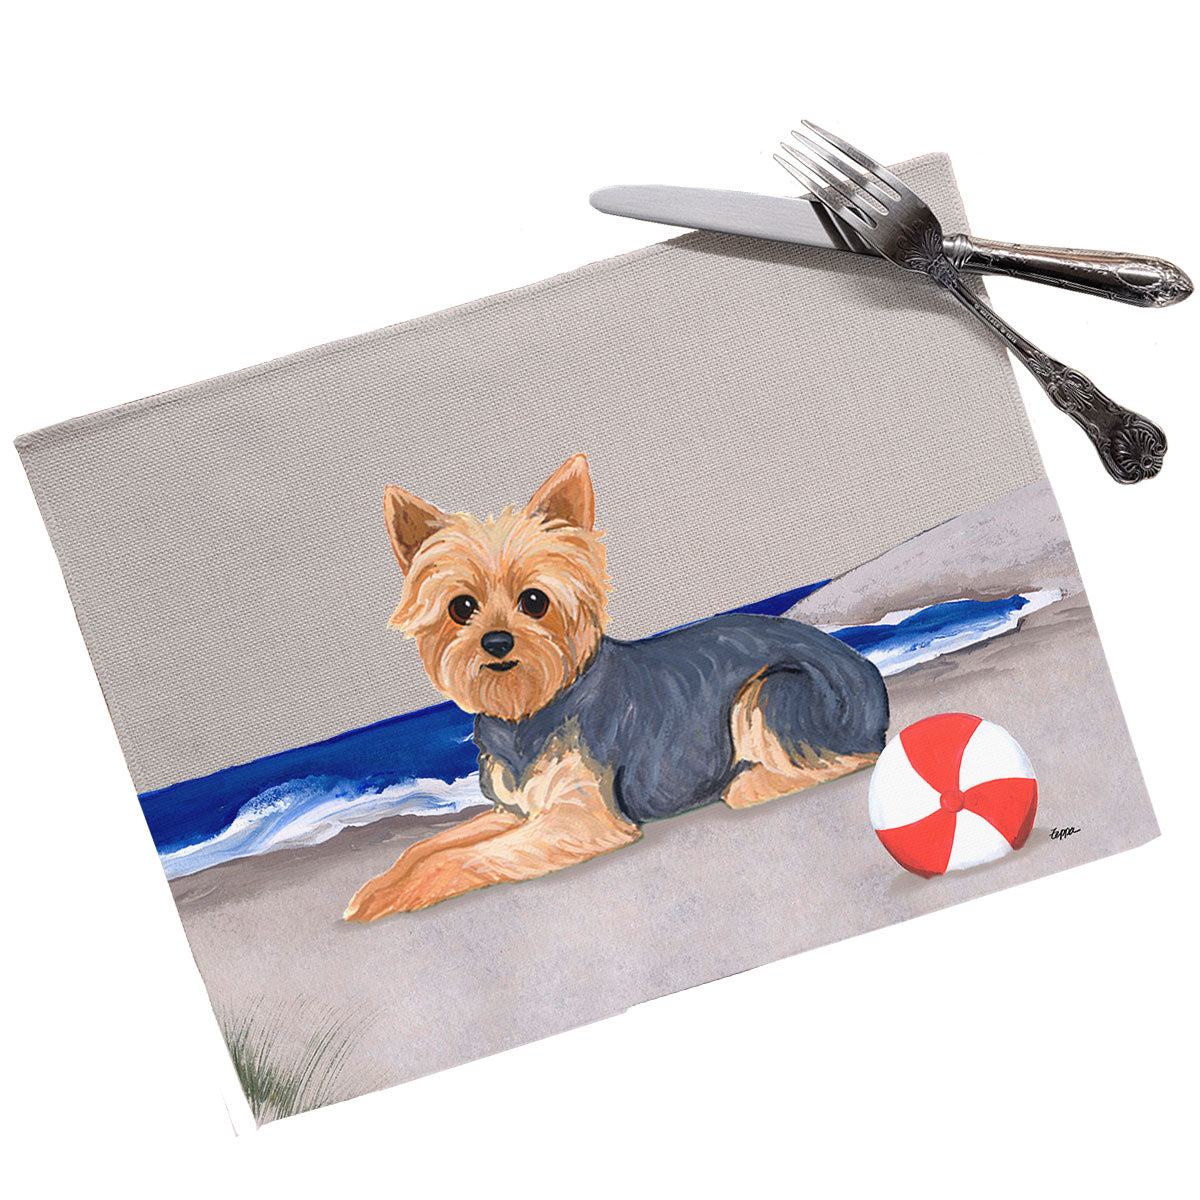 Yorkshire Terrier Scenic Placemats